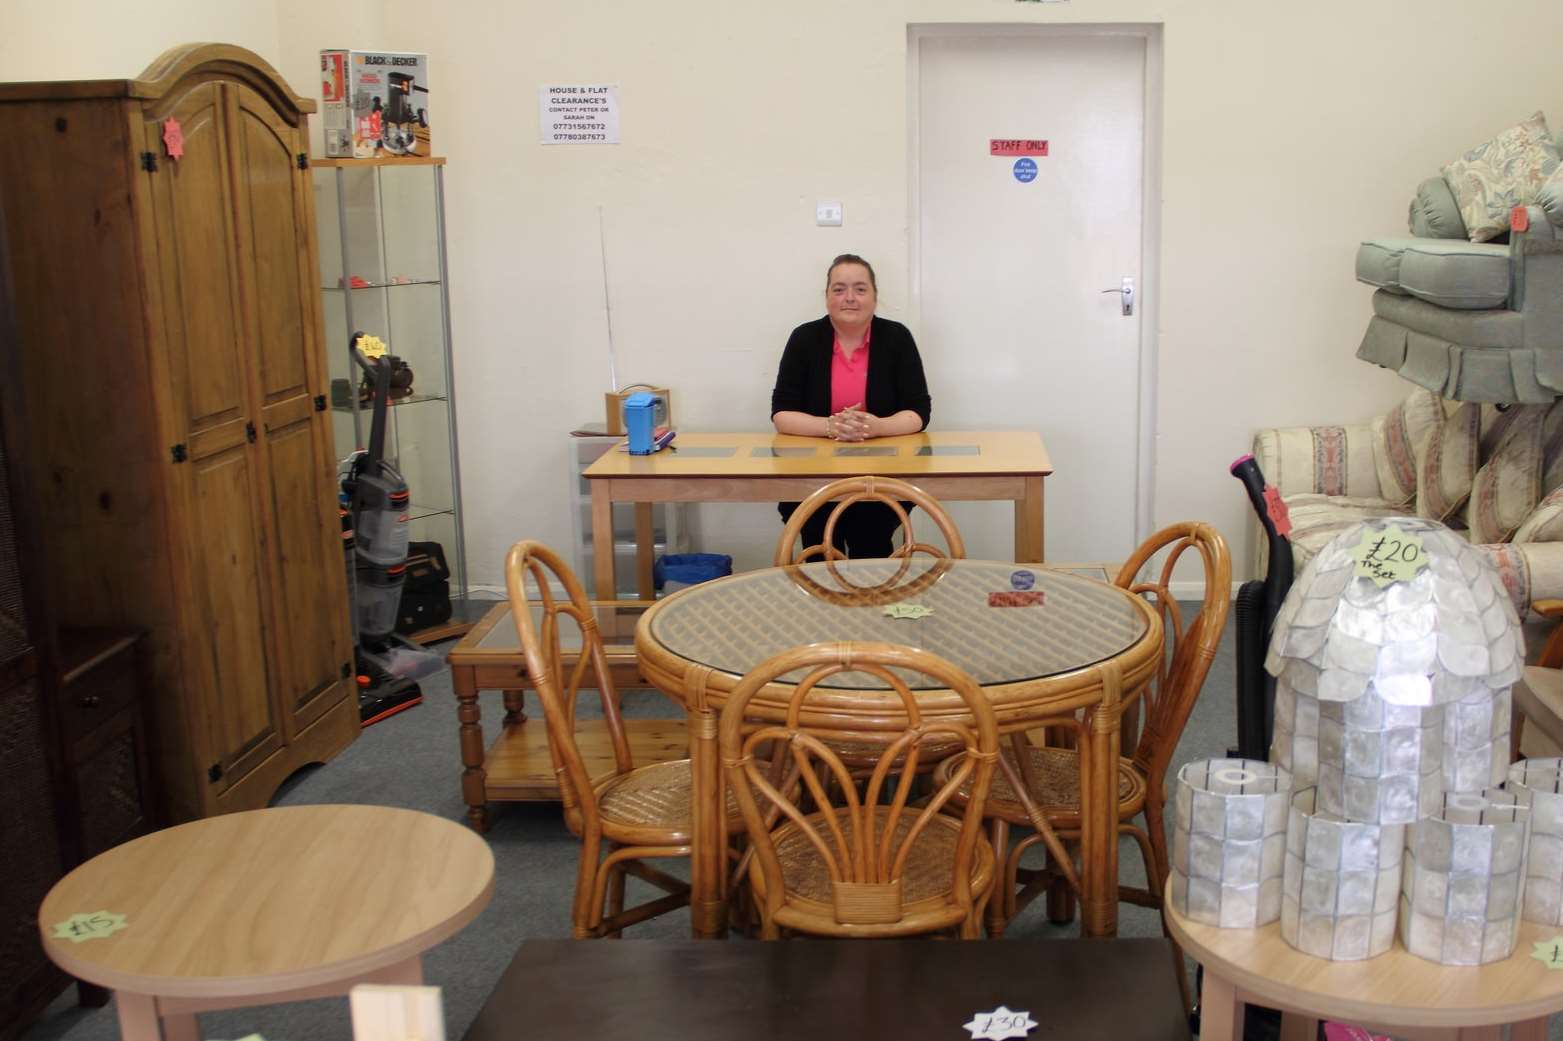 Sarah Cooke in her new shop at The Hive